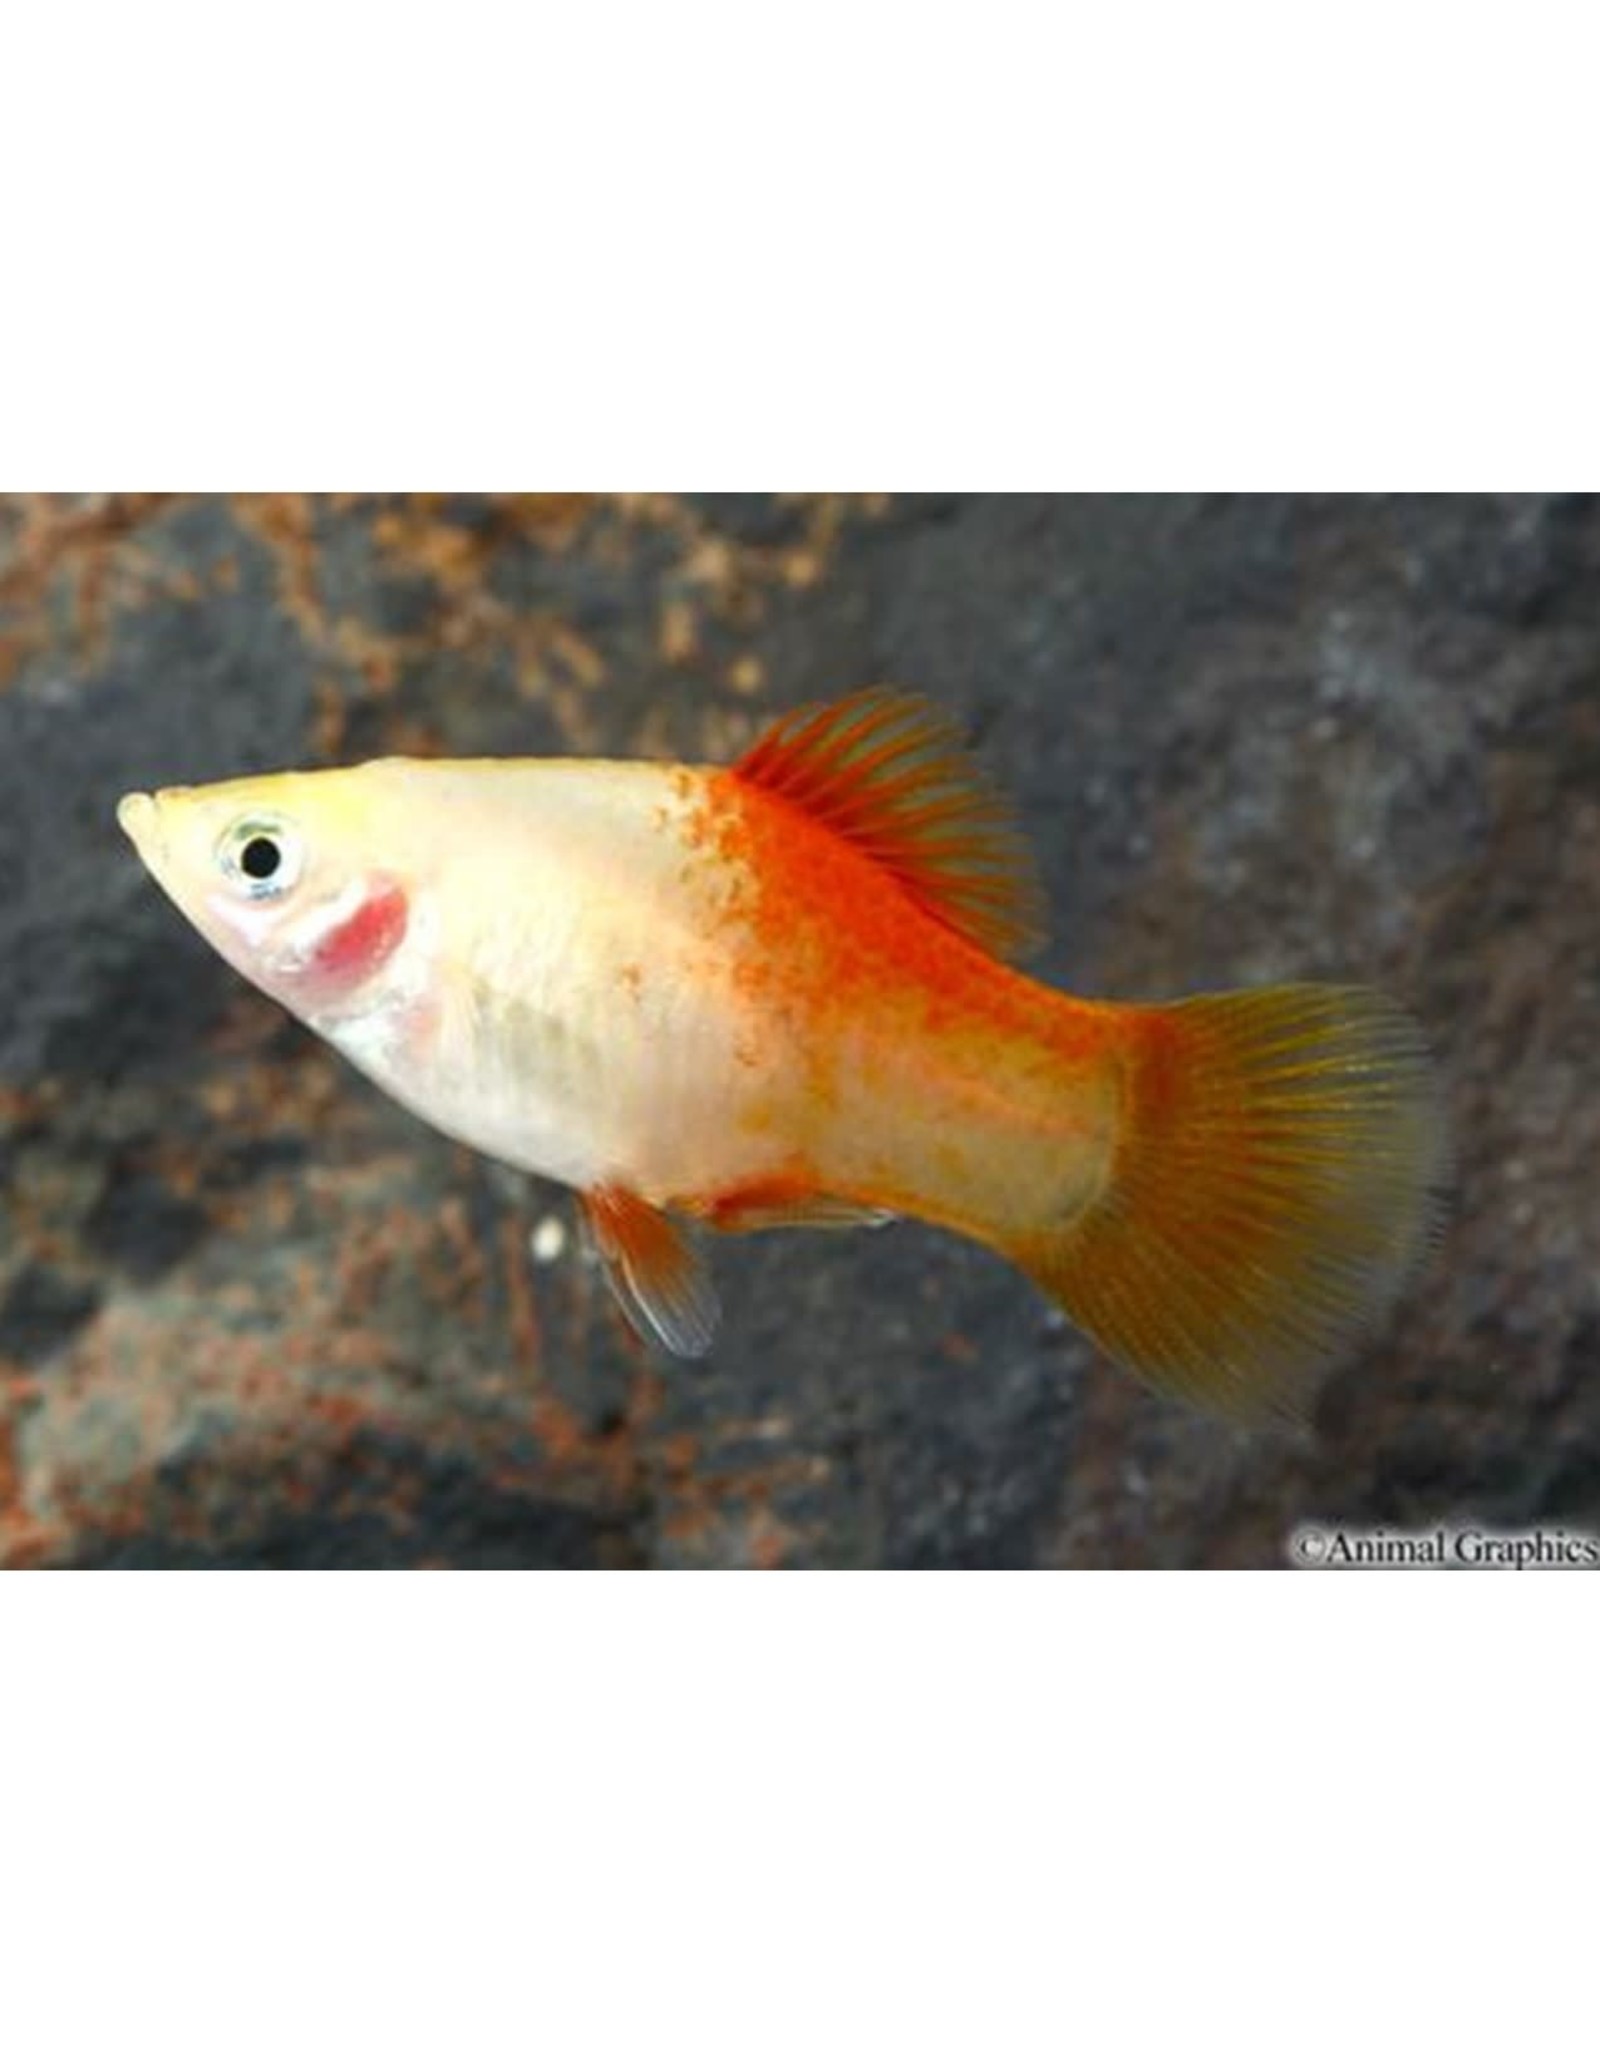 Pineapple Candy Platy Med